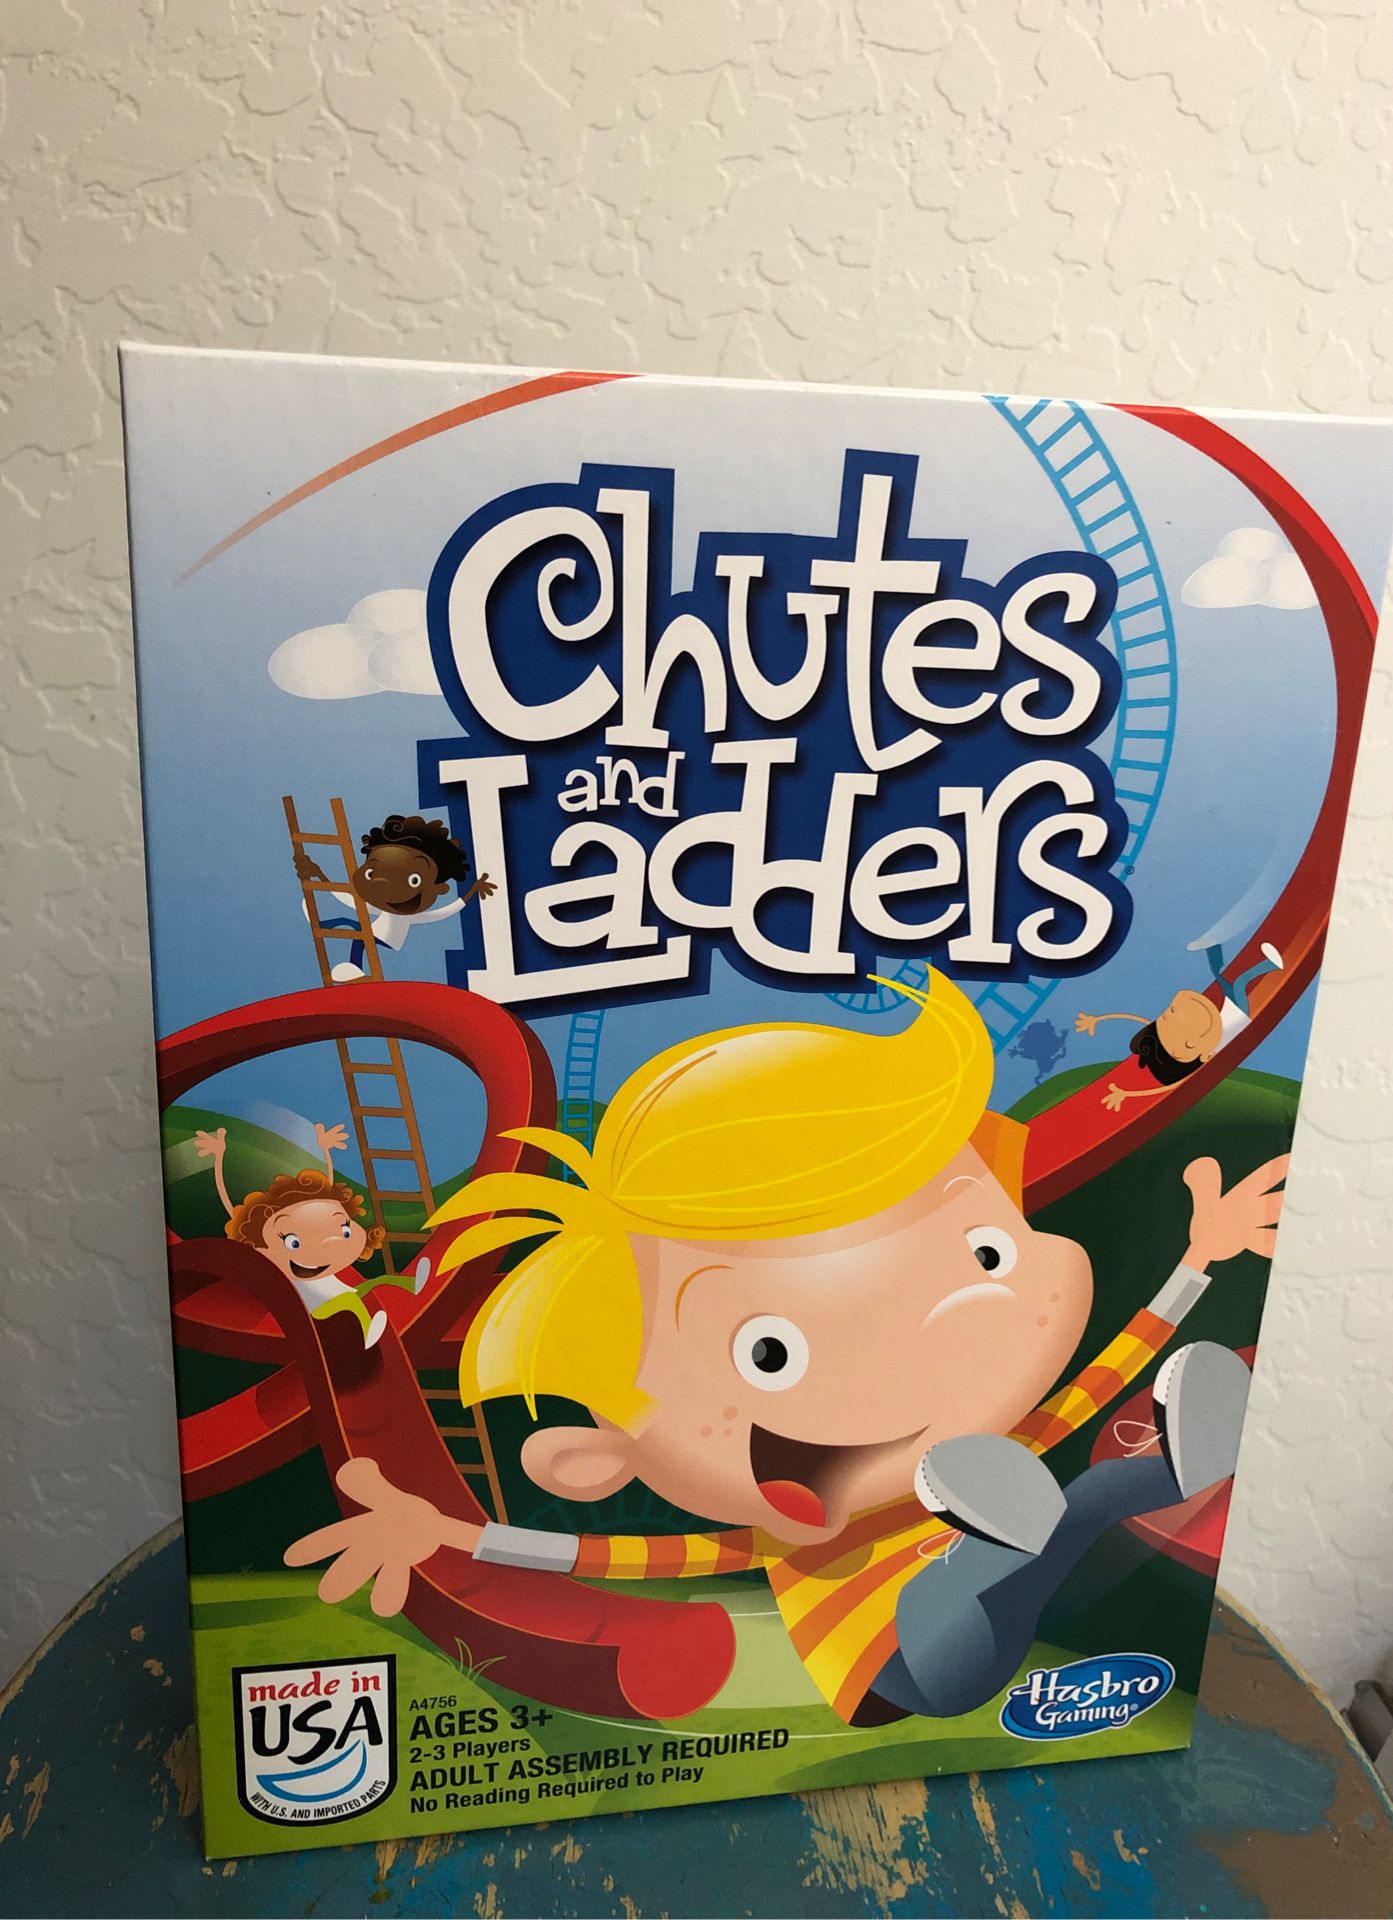 New chutes and ladders game - preschool.